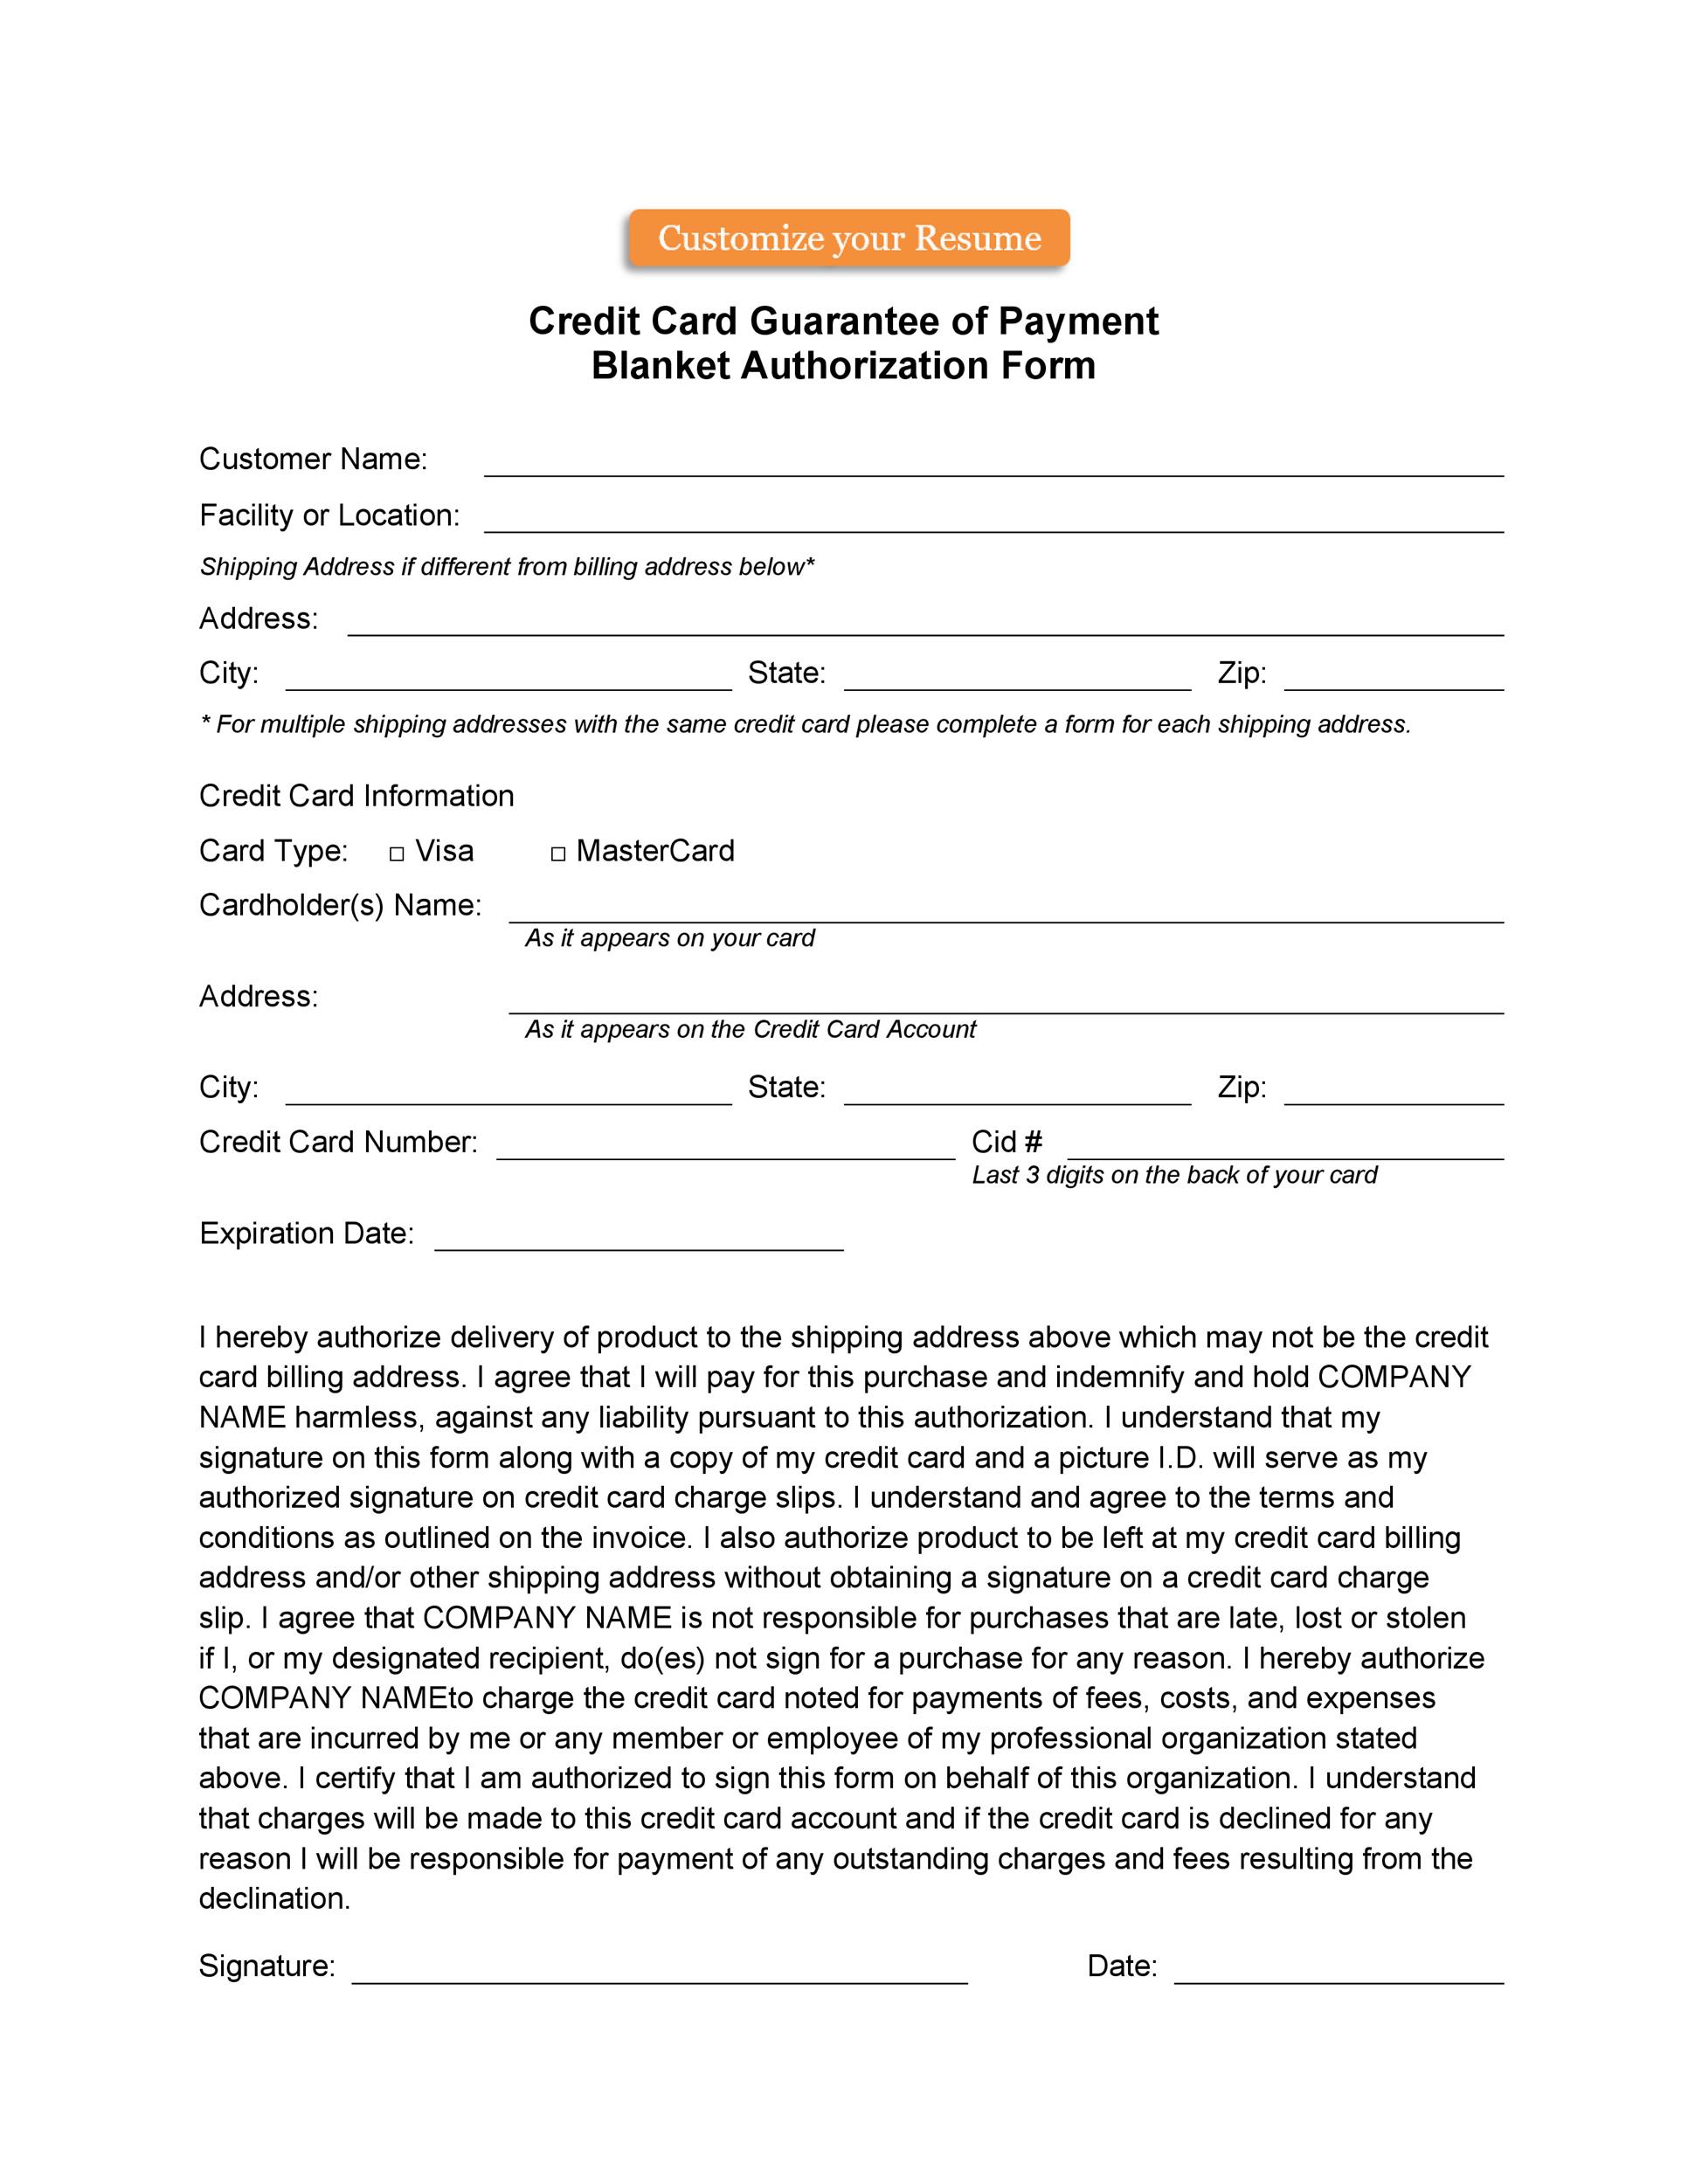 Free credit card authorization form template 22